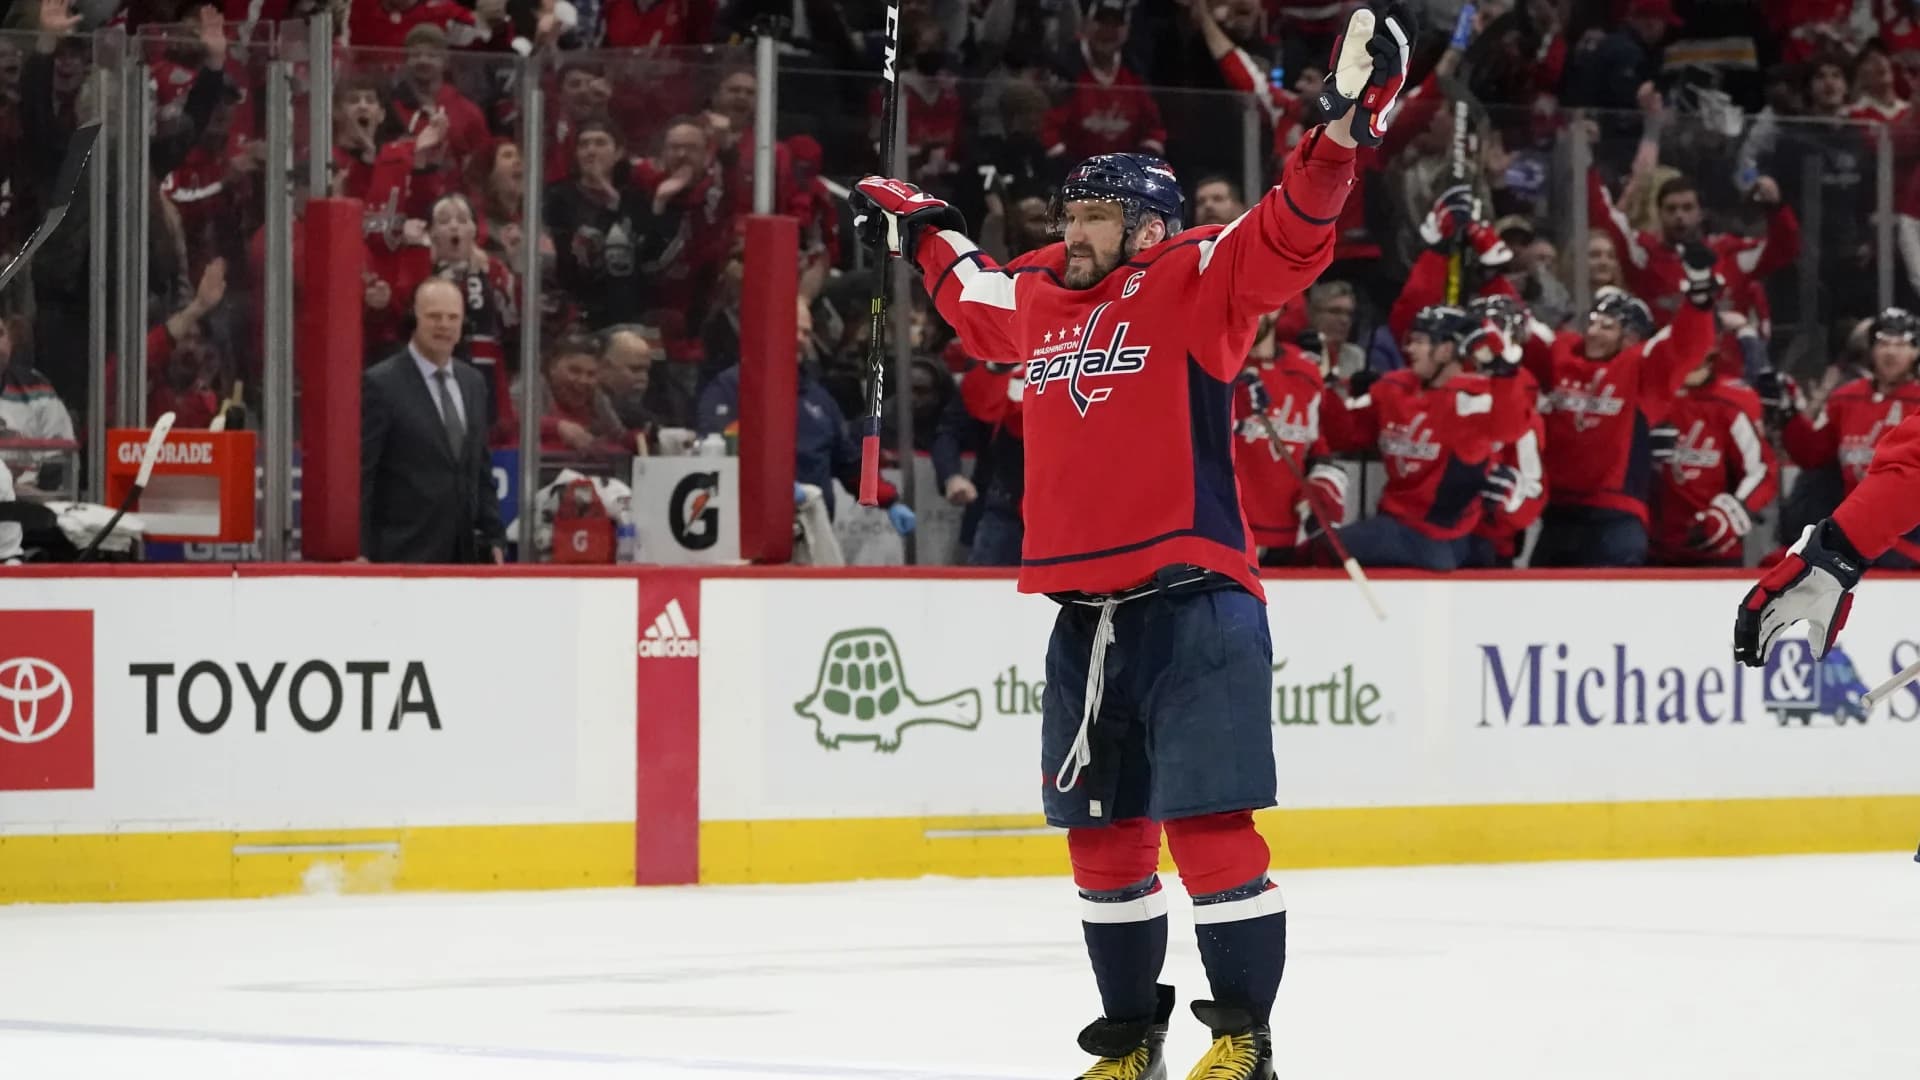 Ovechkin pass Jaromir Jagr for 3rd on NHL goals list in win over Isles